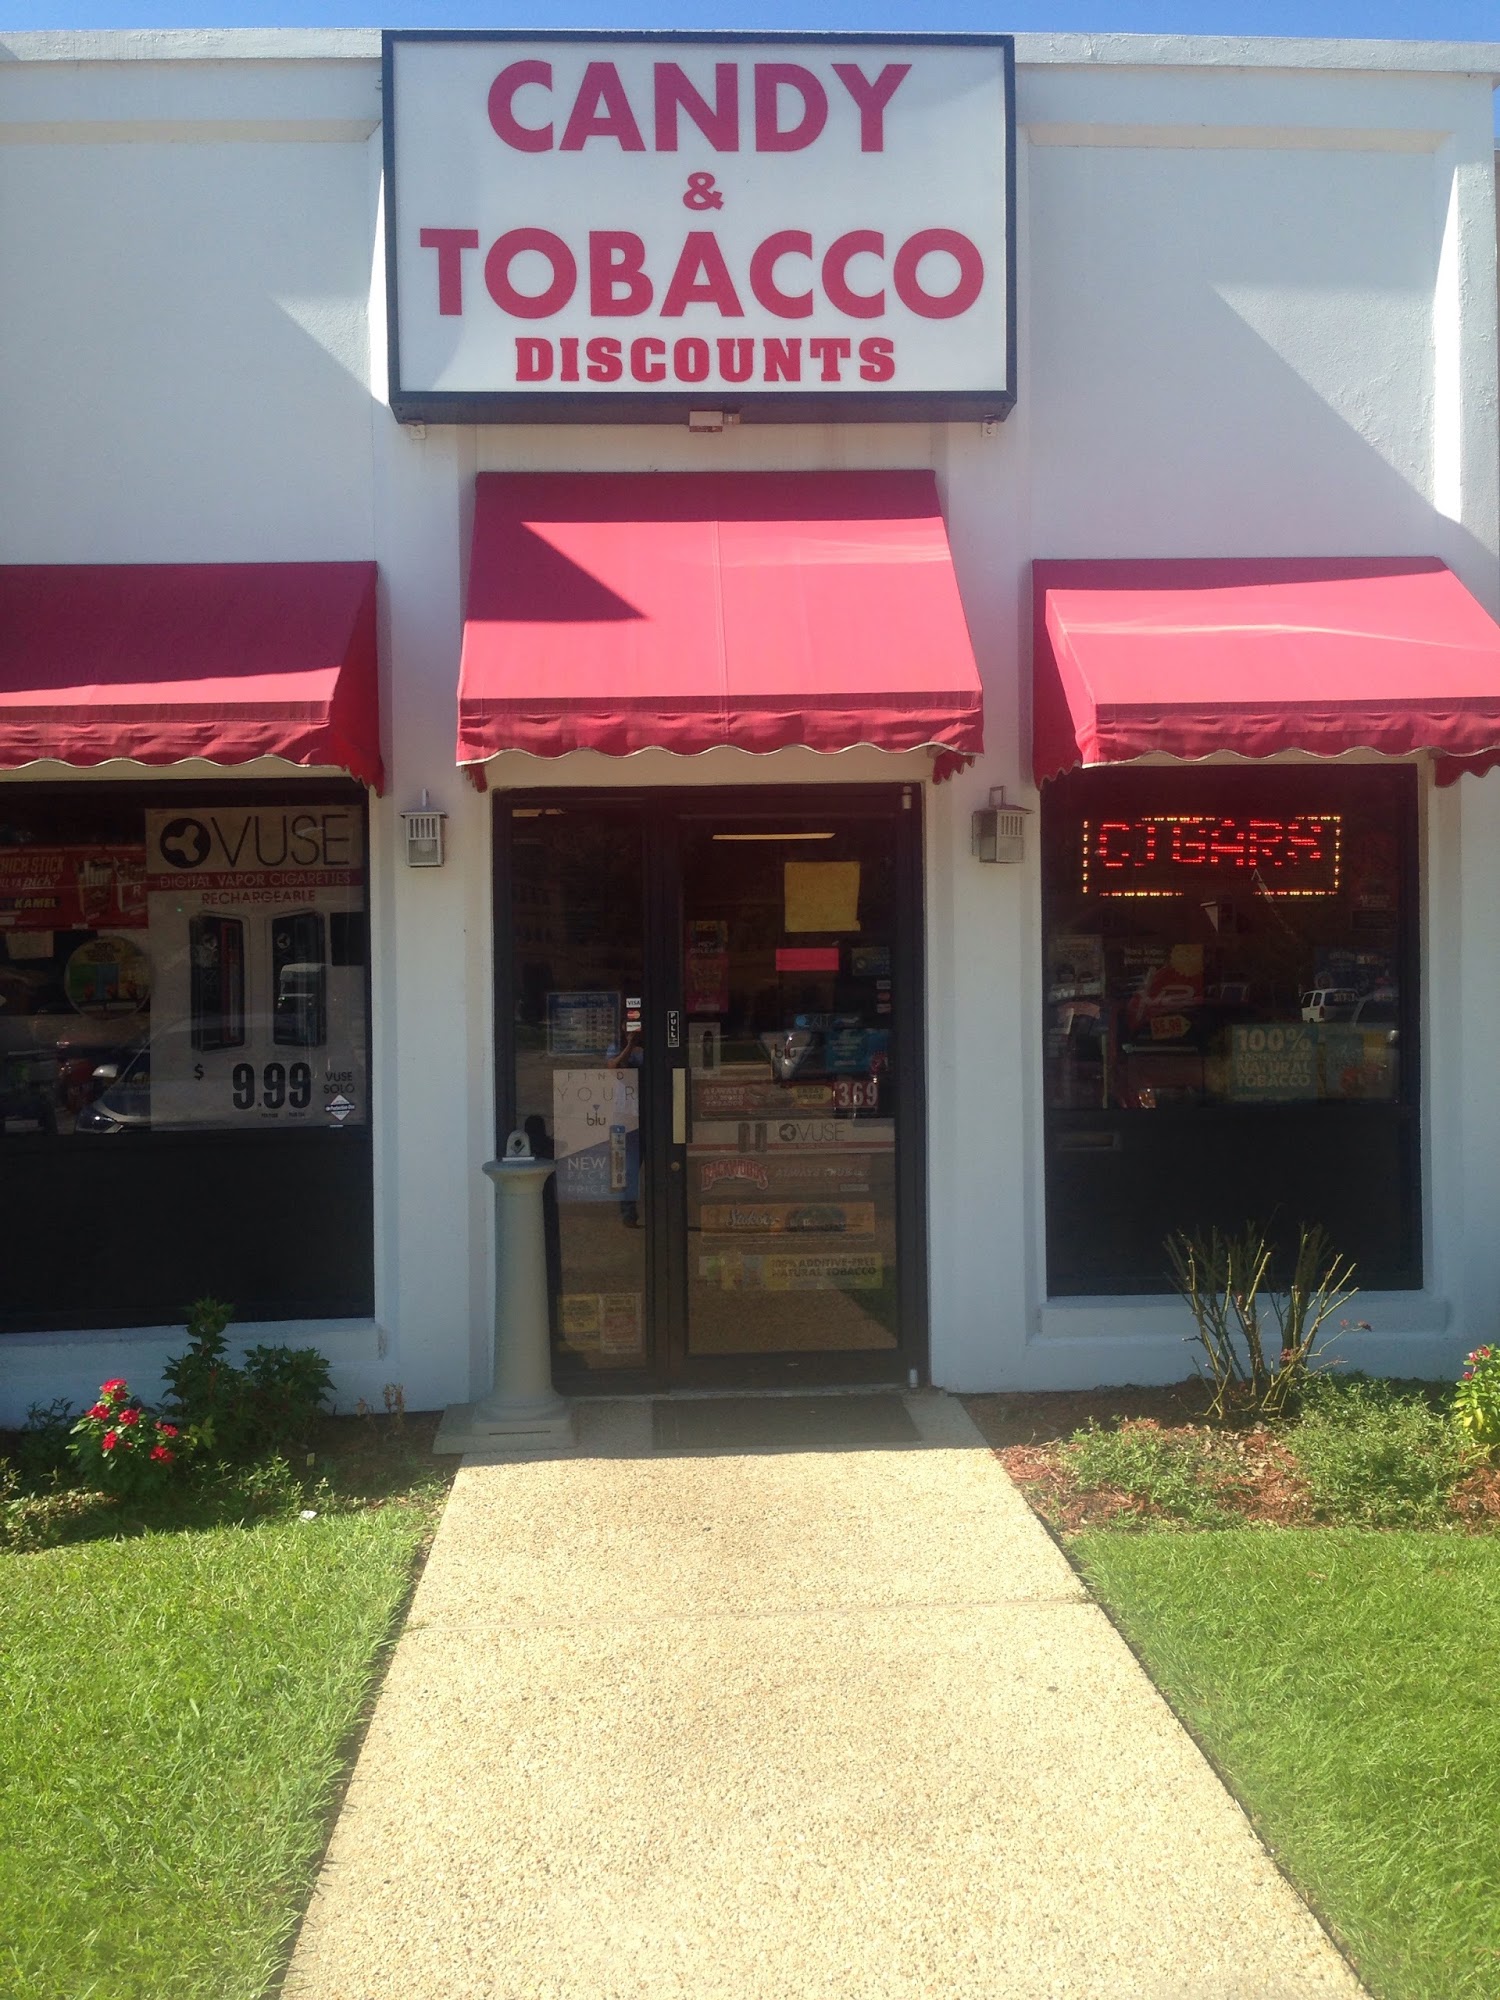 Candy & Tobacco Discounts